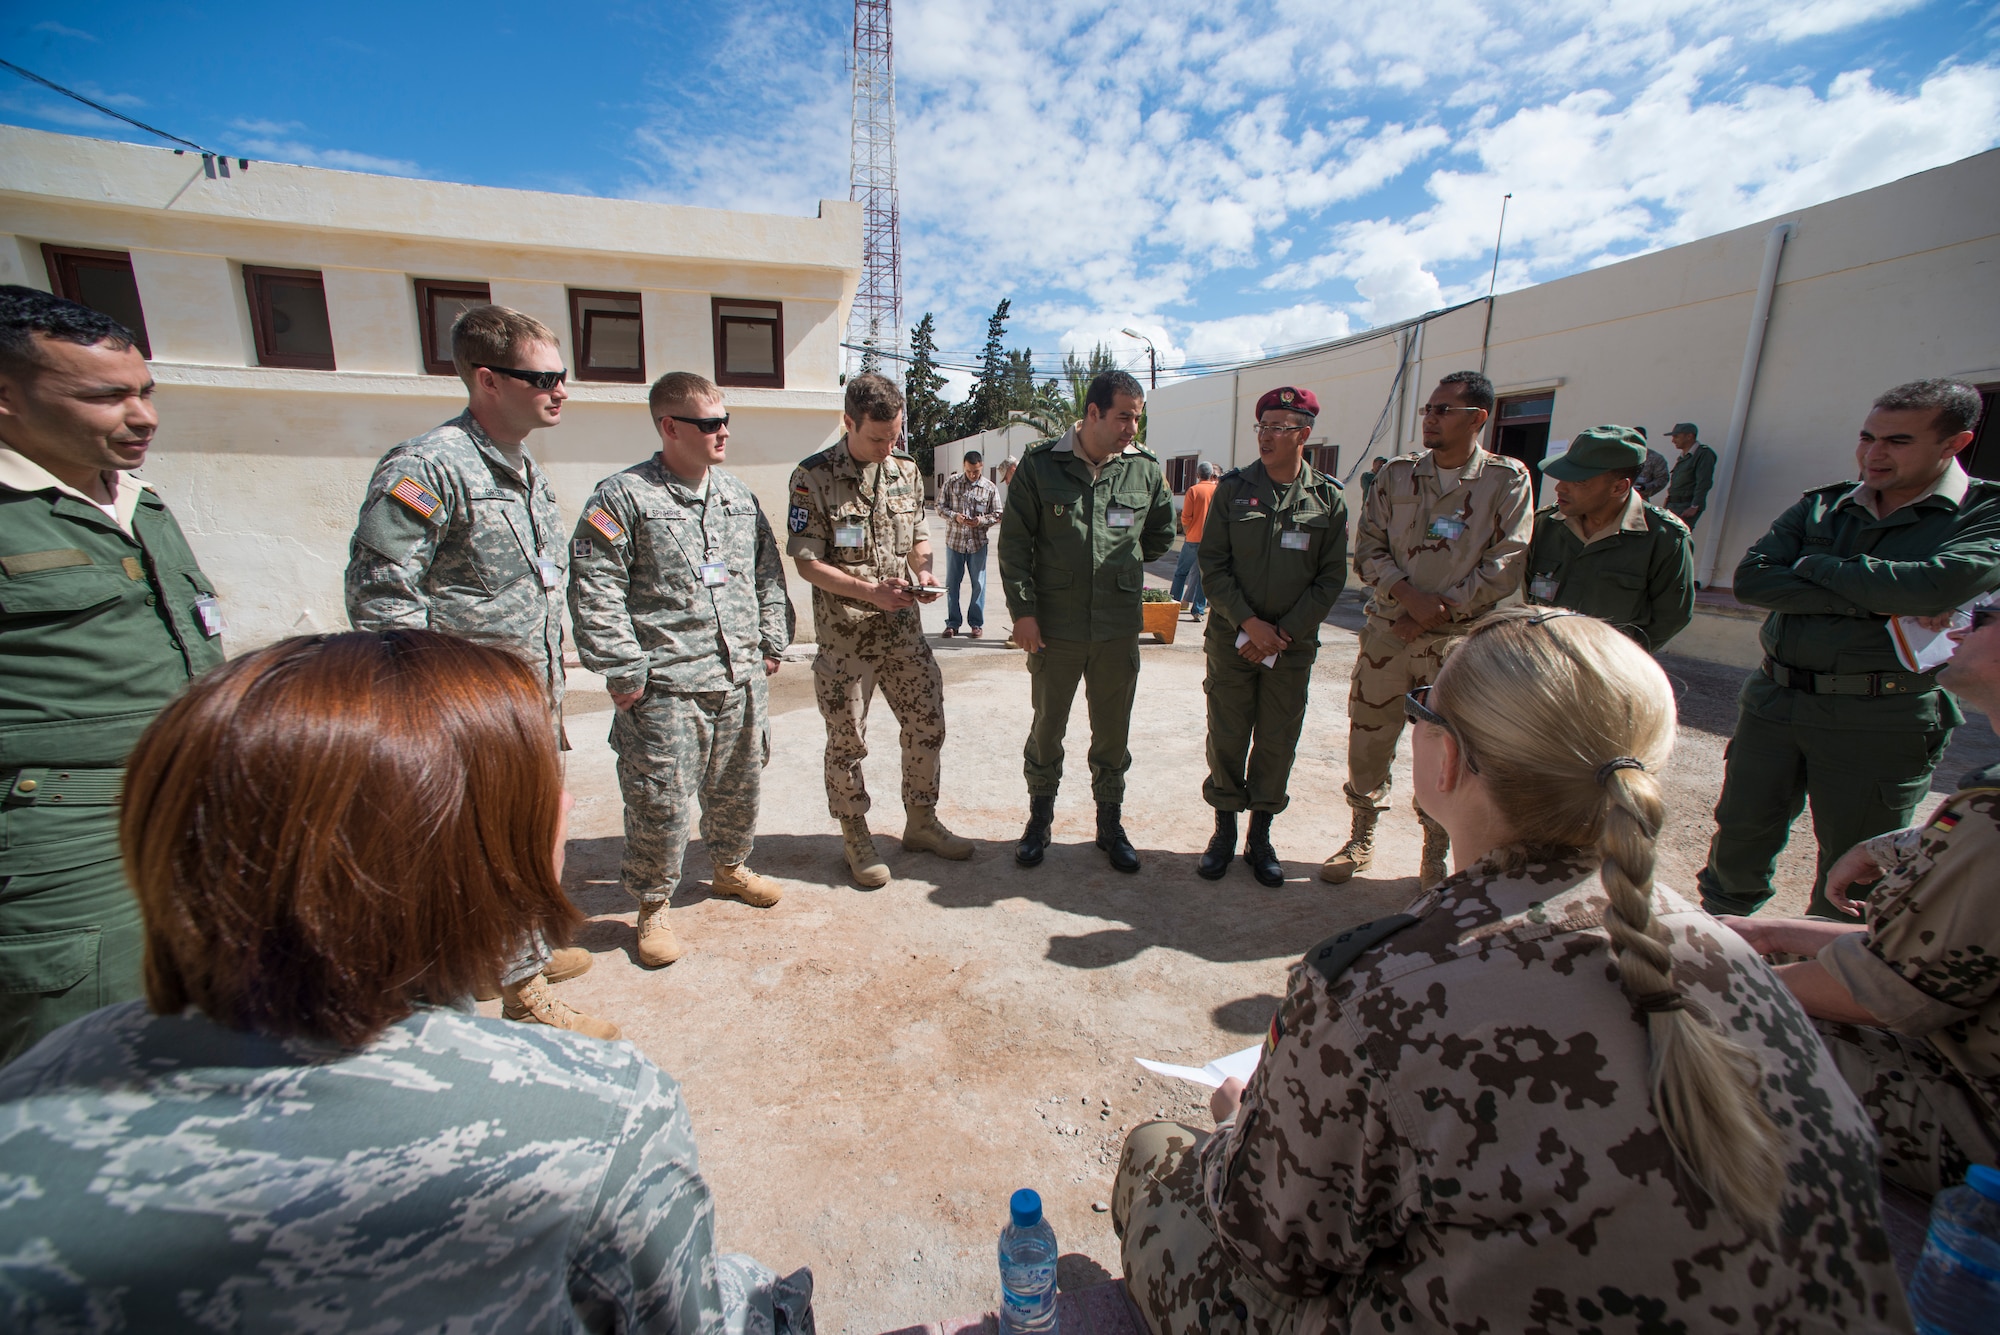 Participants of AFRICAN LION 16 speak together in Agadir, Morocco, April 19, 2016. The annual U.S. Marine Corps Forces Europe and Africa and Kingdom of Morocco-led joint, combined, exercise brought together 11 different countries to participate in a Combined Joint Task Force command post exercise and a peace support operations field training to improved interoperability between countries. (U.S. Air Force photo by Senior Airman Krystal Ardrey/Released)